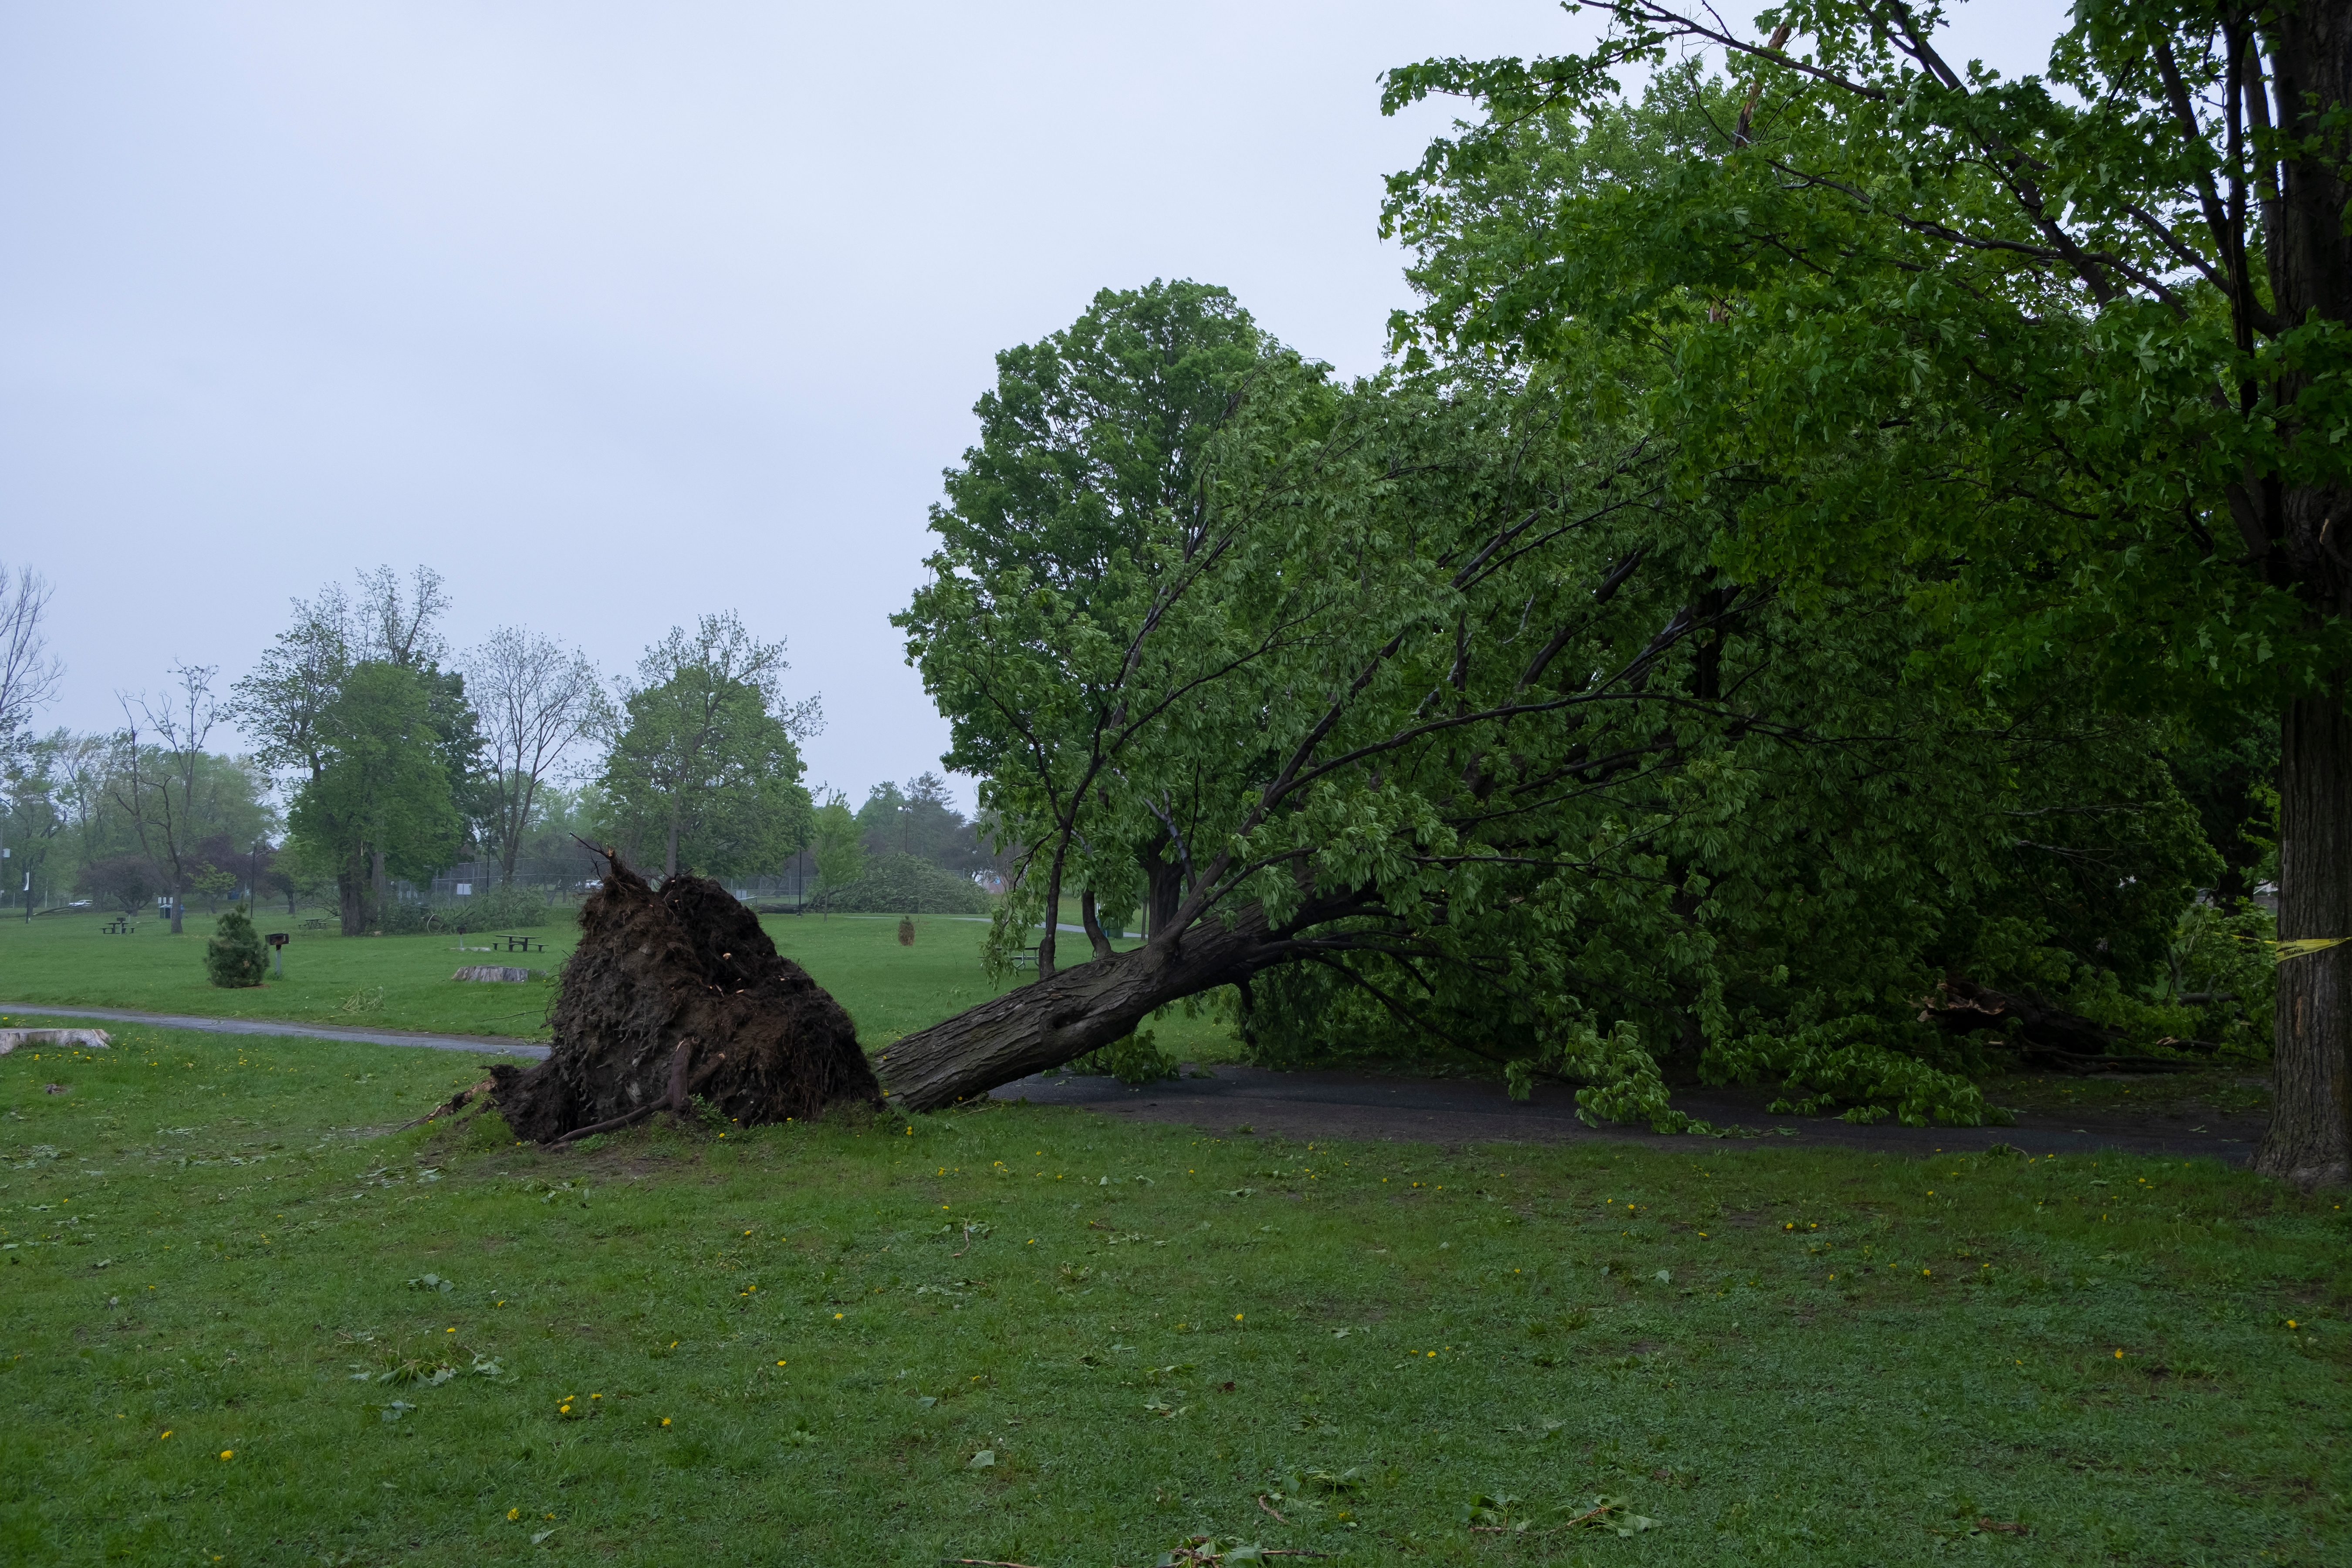 Uprooted tree in hurricane aftermath.